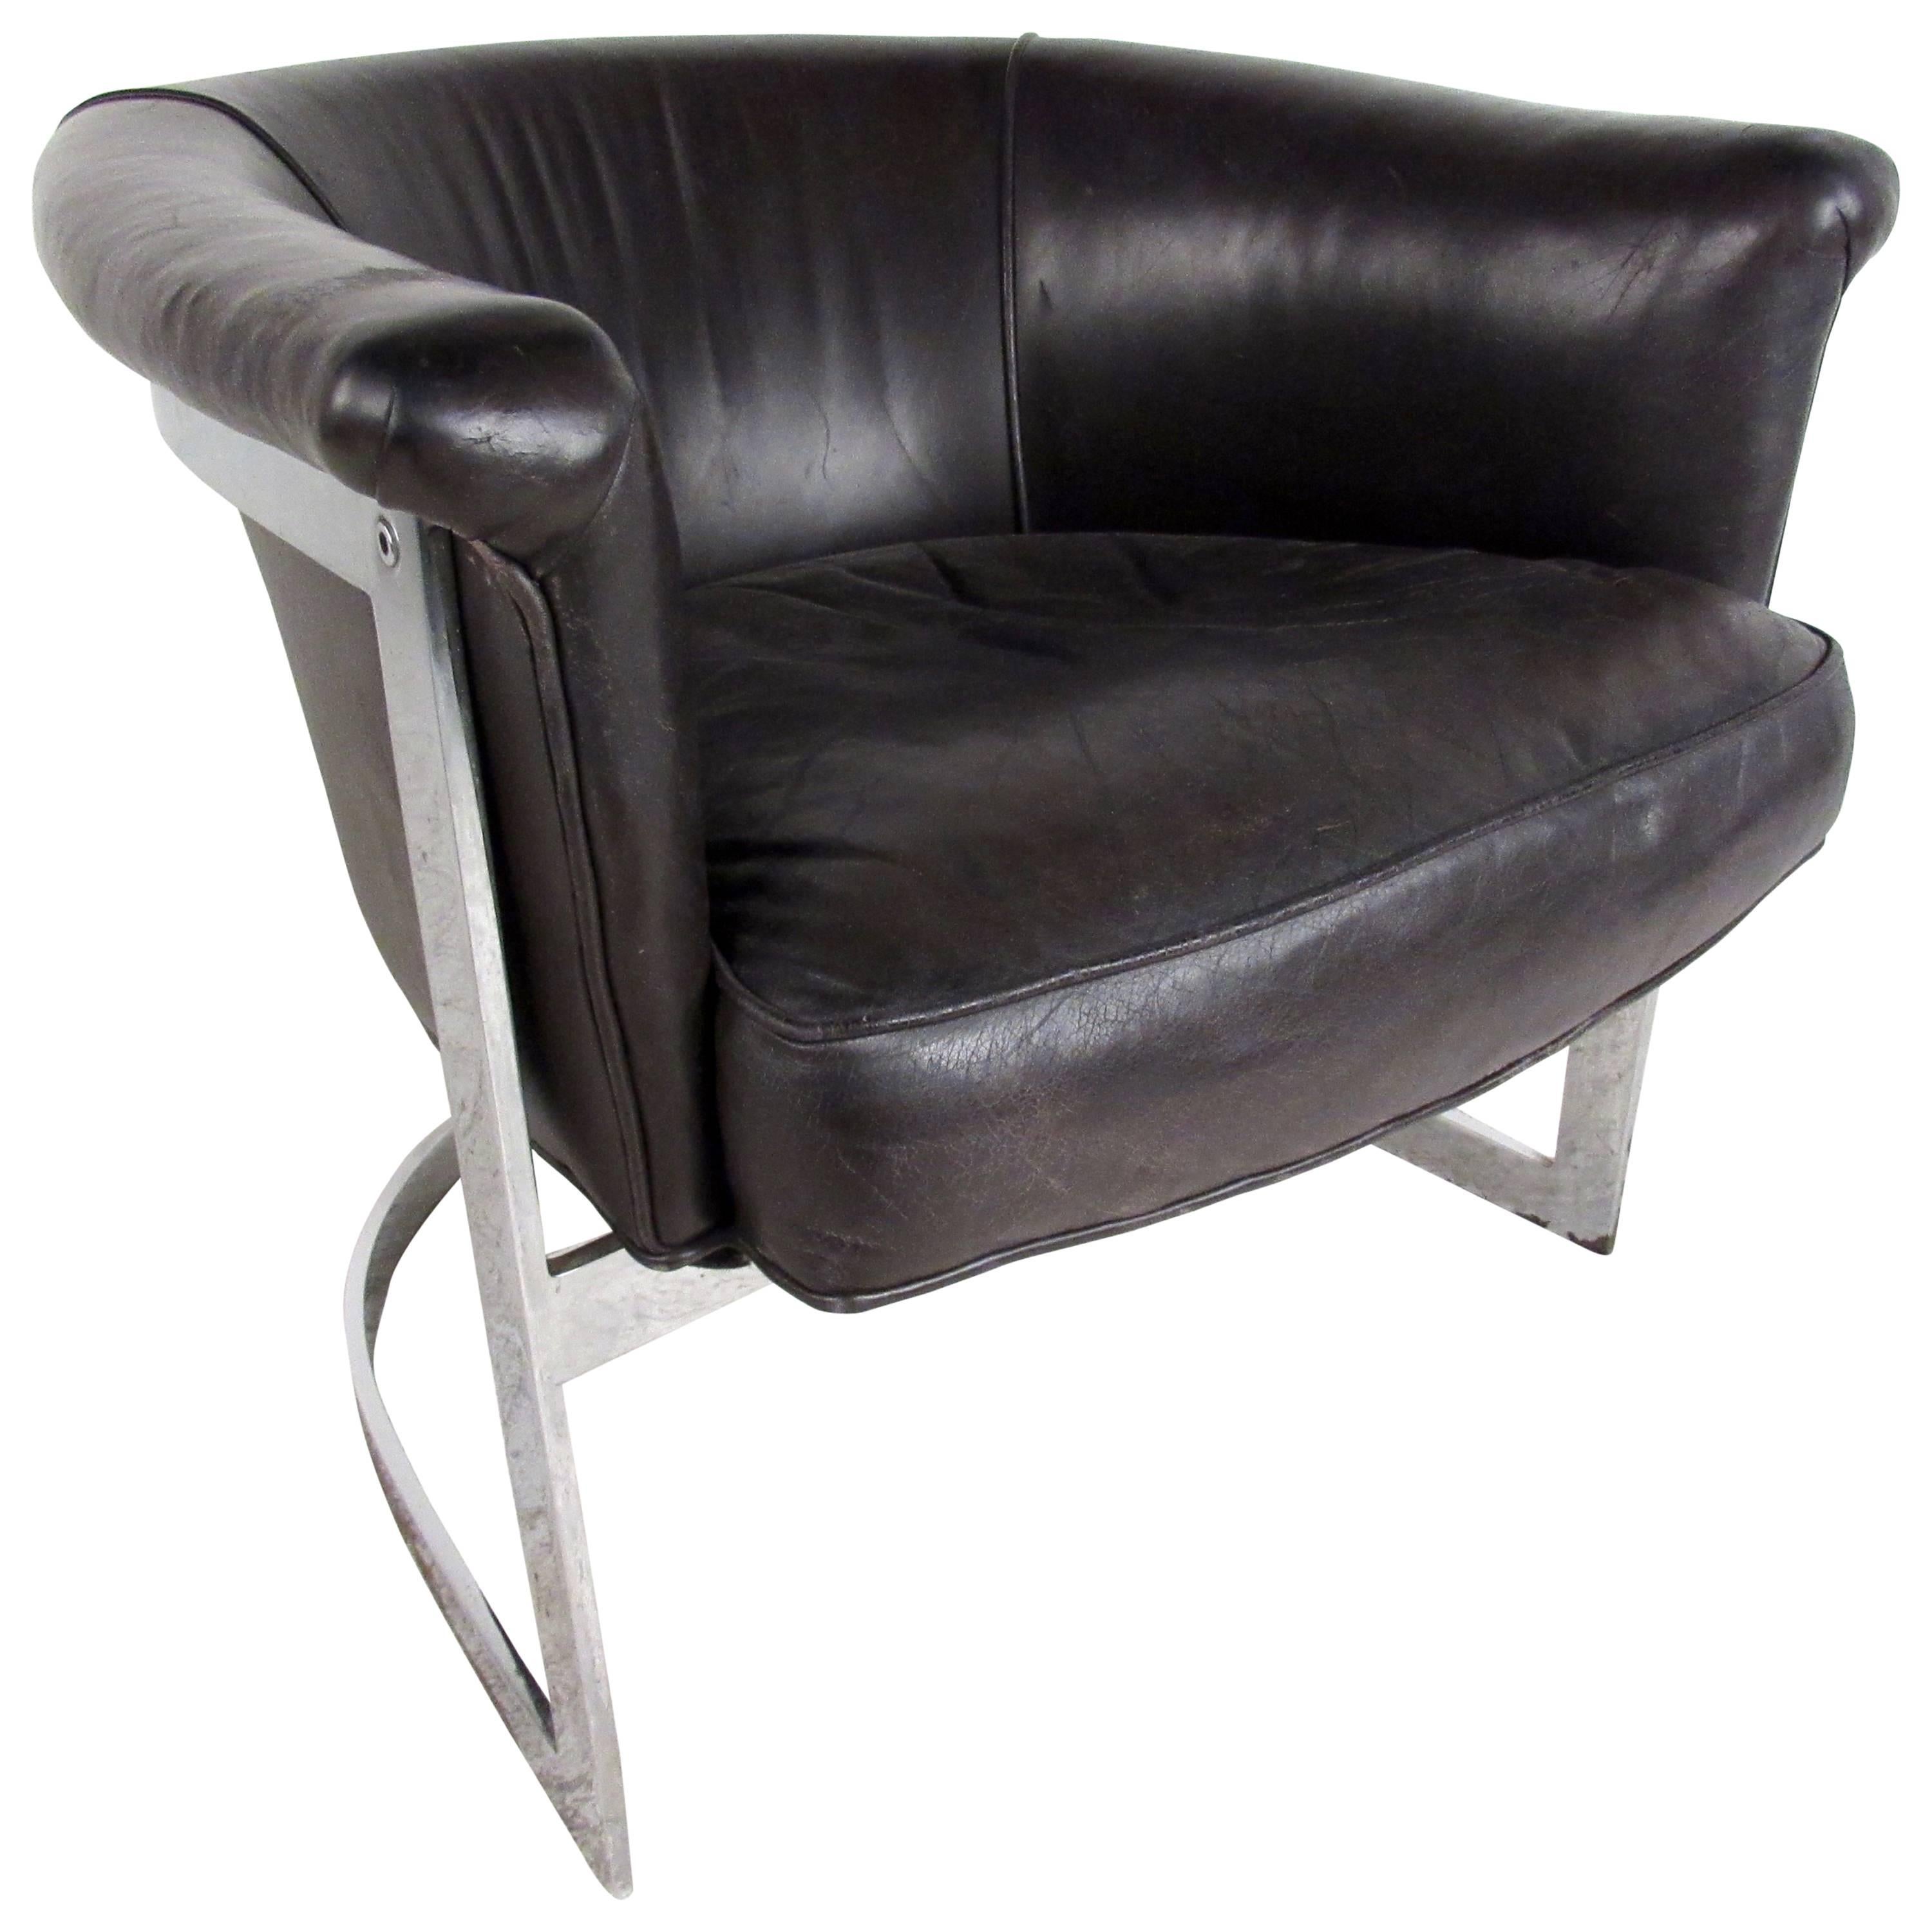 Vintage Modern Cantilever Leather Barrel Chair in the Manner of Milo Baughman